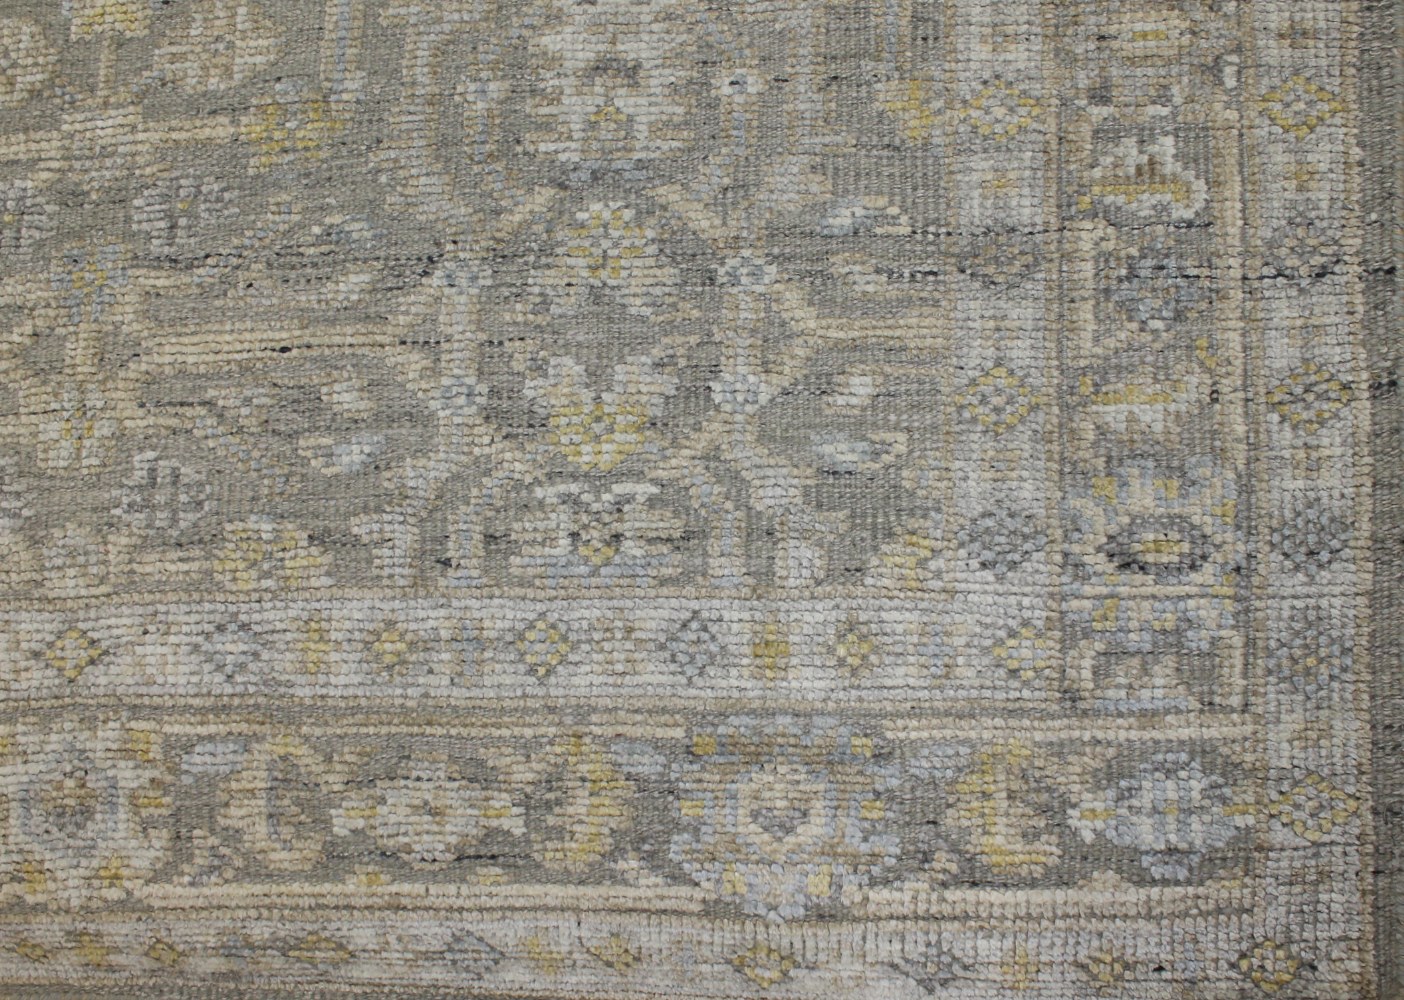 6x9 Oushak Hand Knotted Wool & Viscose Area Rug - MR023503